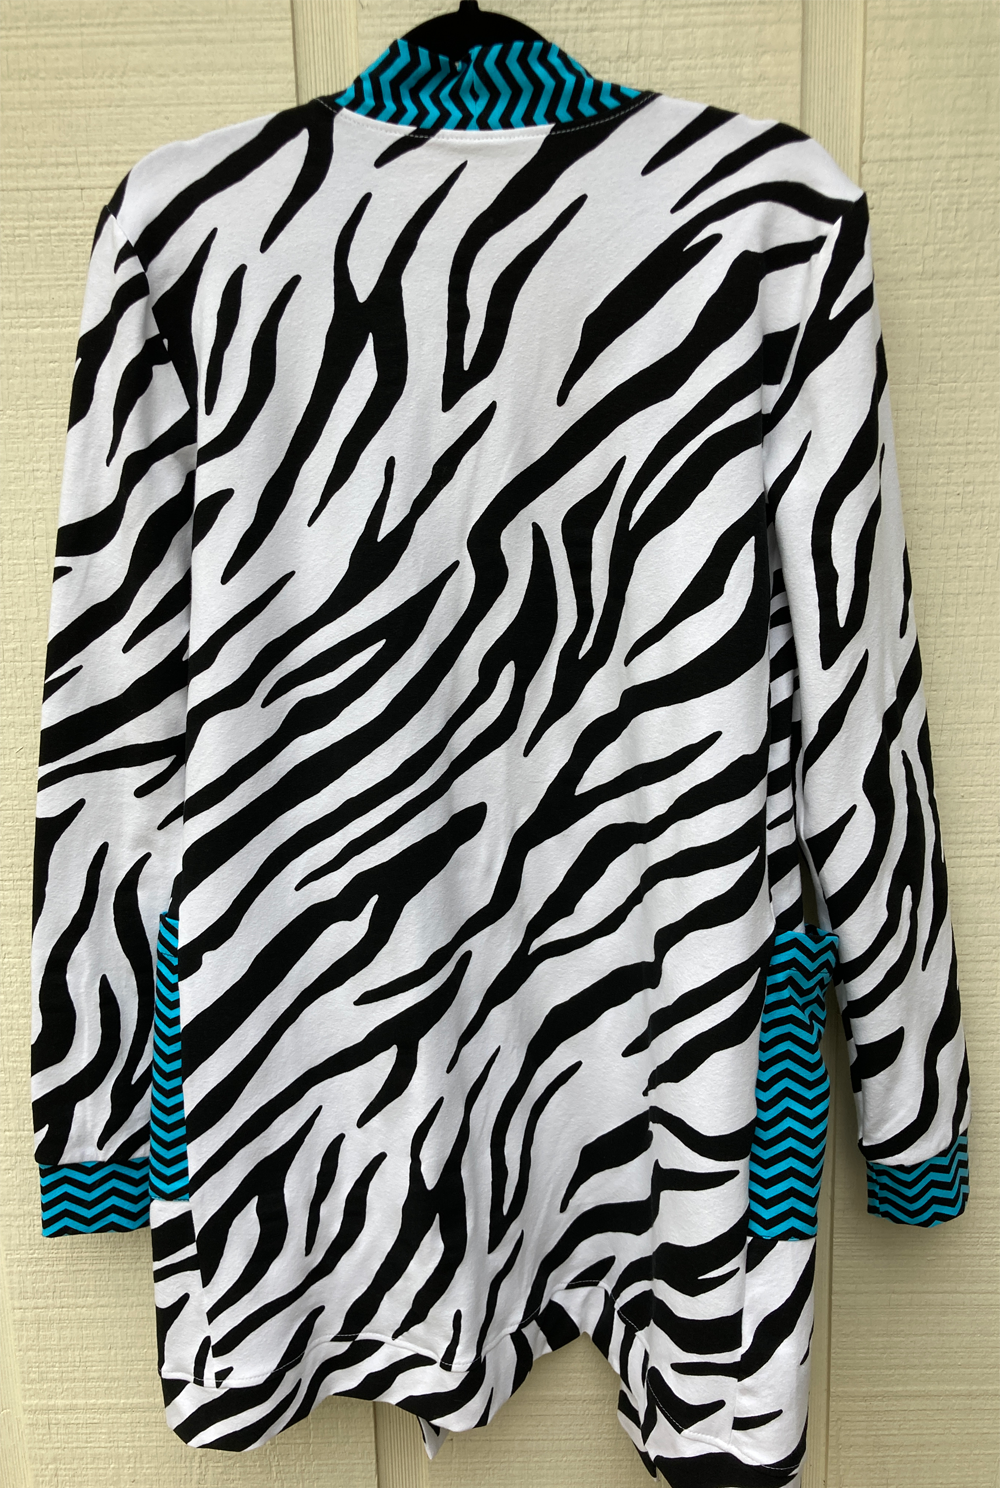 Shows the whole back of the cardigan with electric blue and navy chevron striped edging with black and white zebra body.